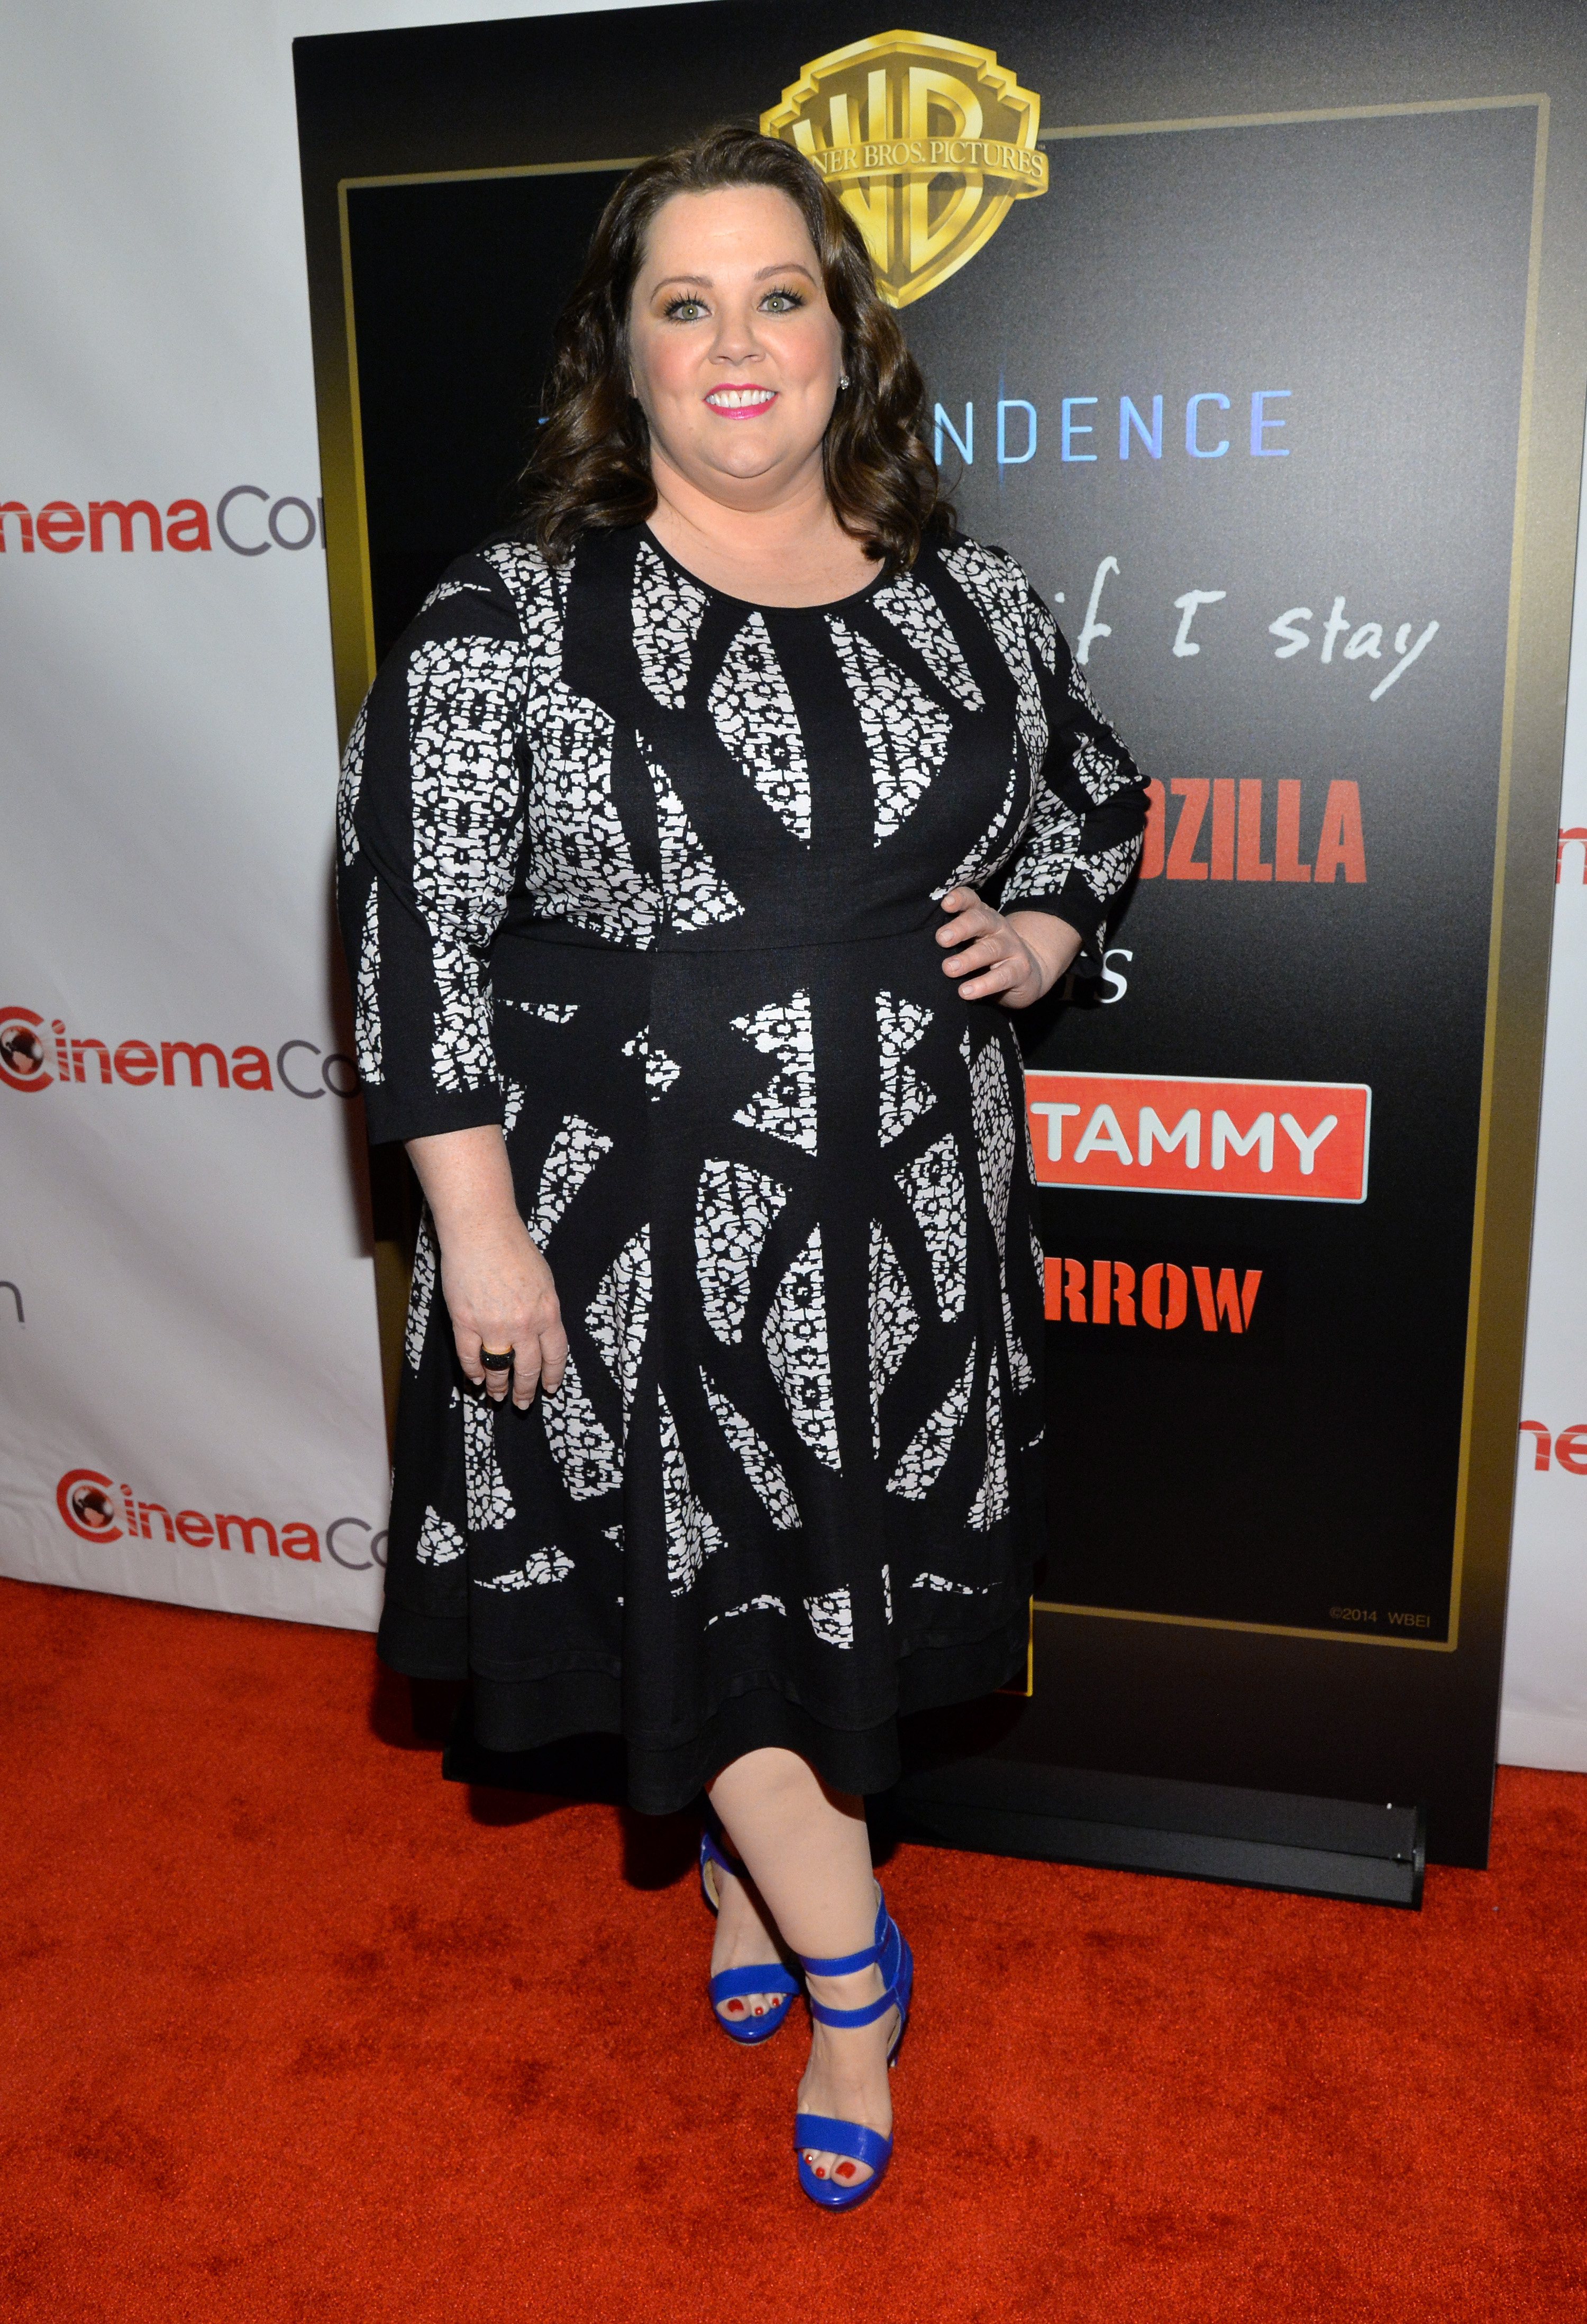 Freaky Fug Friday: Well Played, Melissa McCarthy